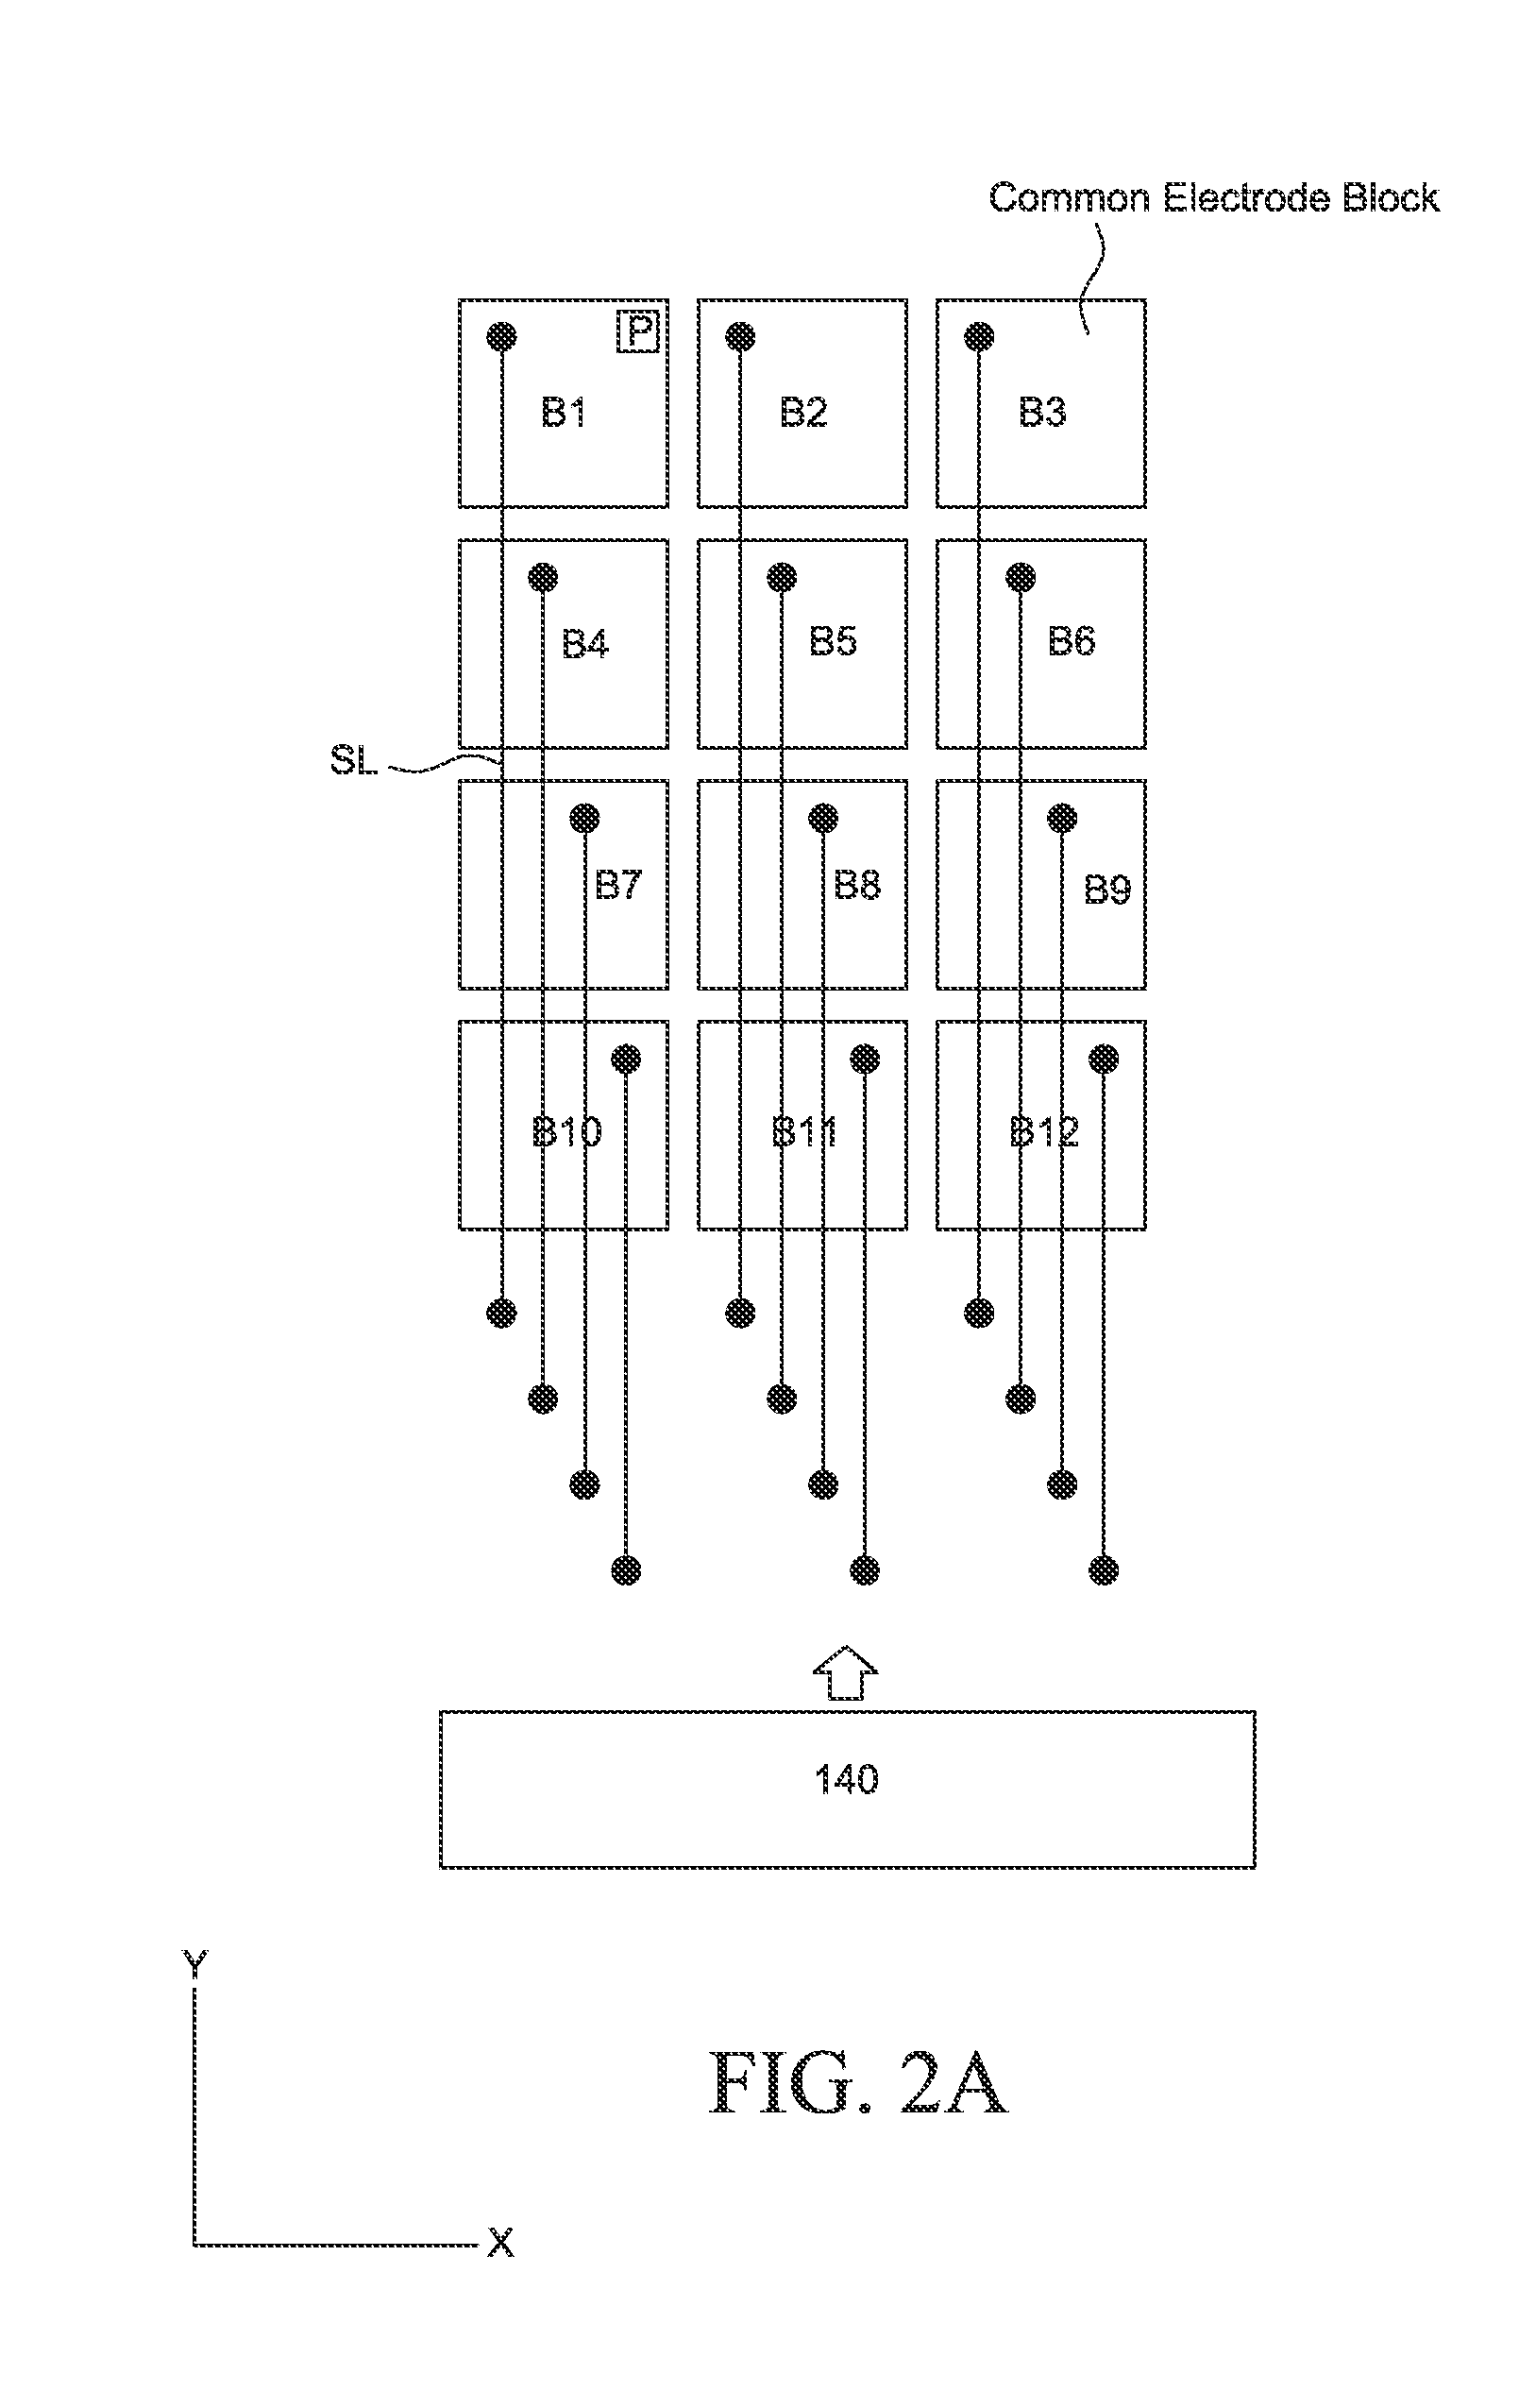 Display panel with external signal lines under gate drive circuit